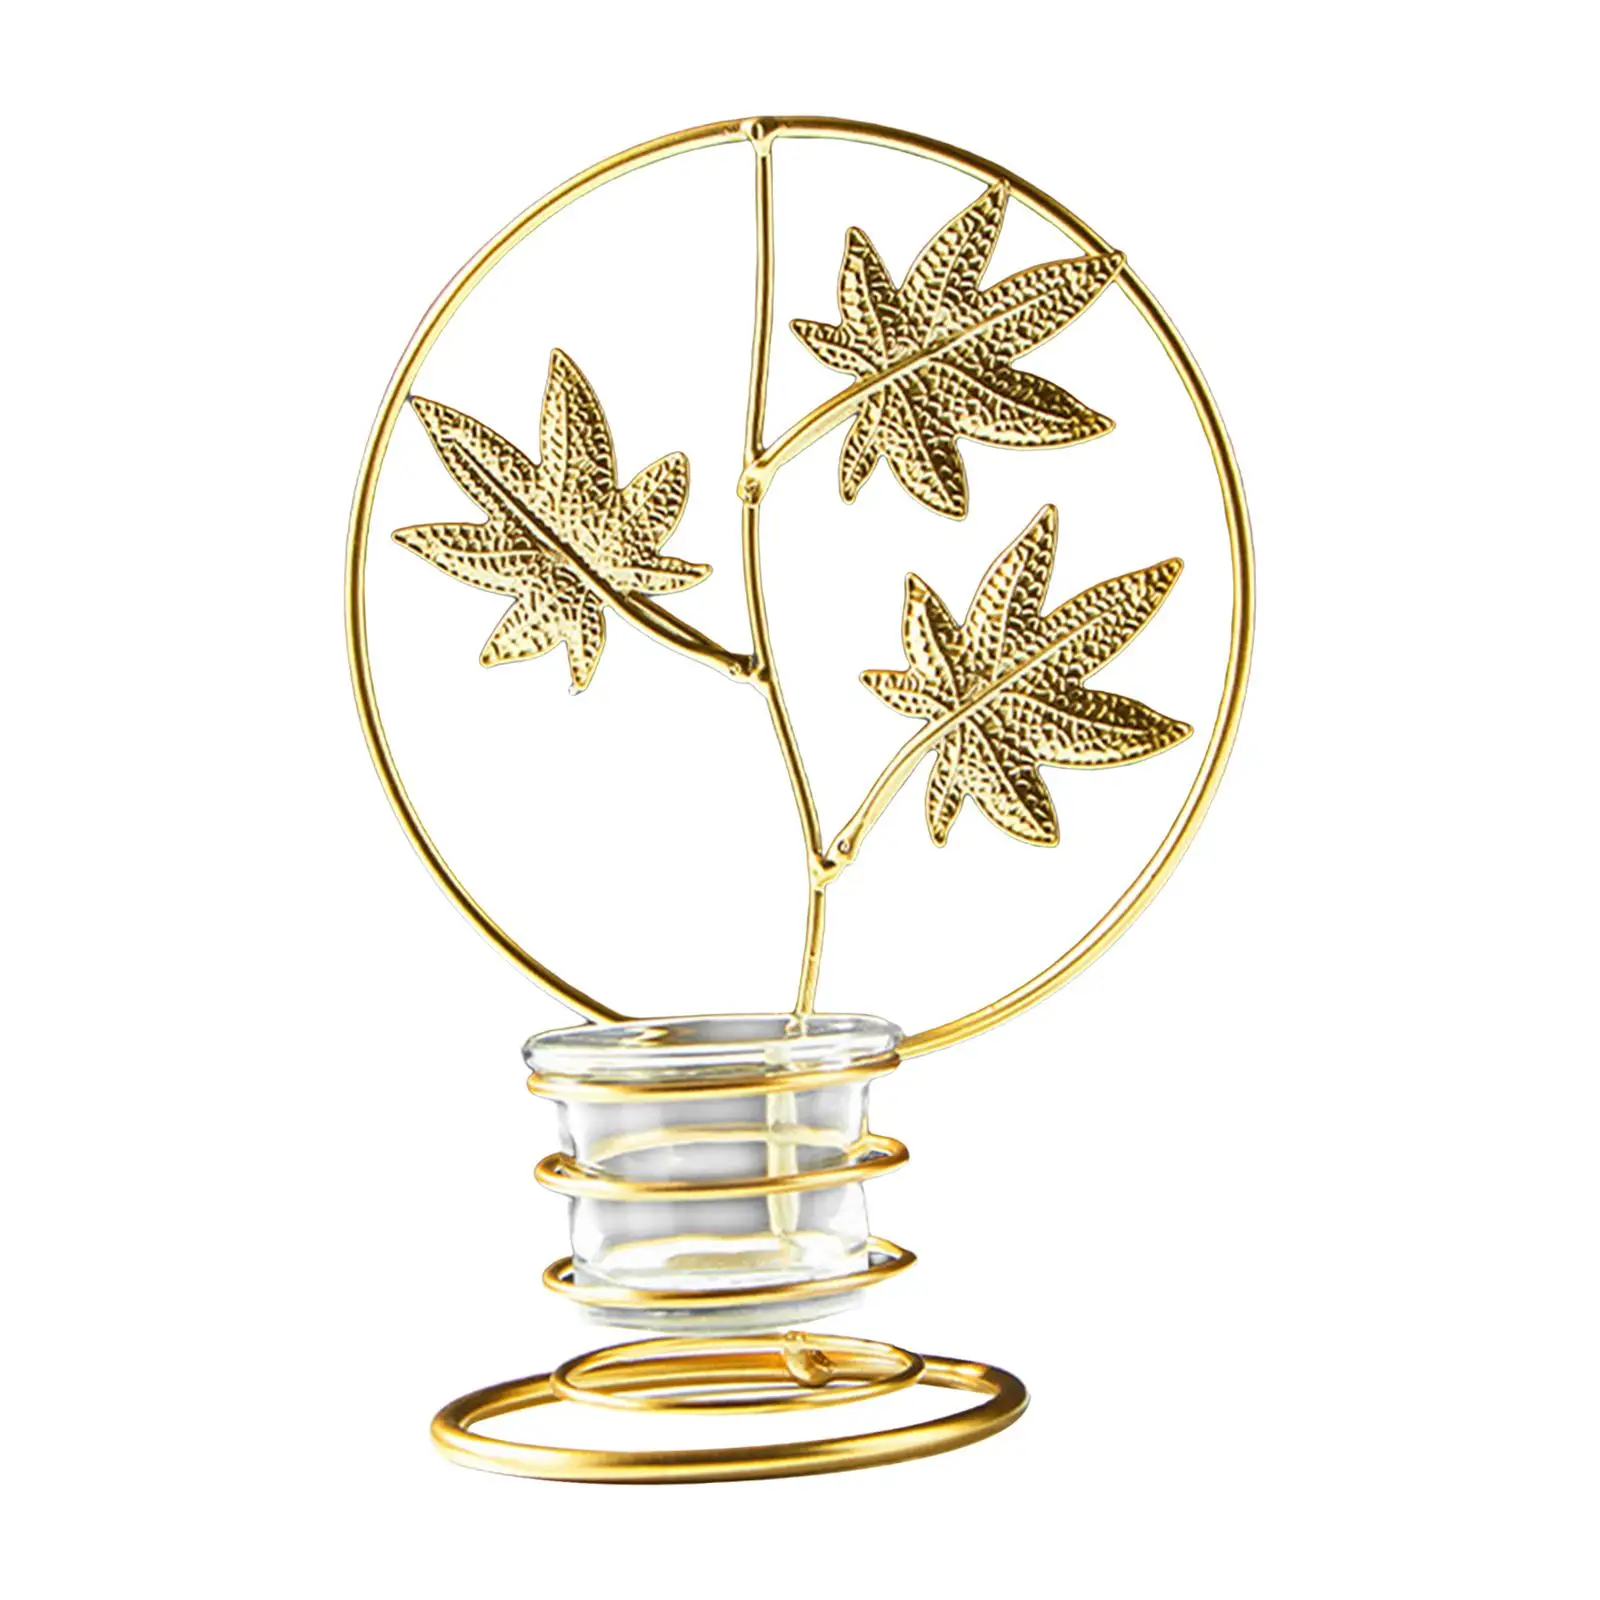 Tea Lights Candle Holder Decorative Metal Leaves Candlestick Iron Candleholder for Home Wedding New Year Festival Dining Table